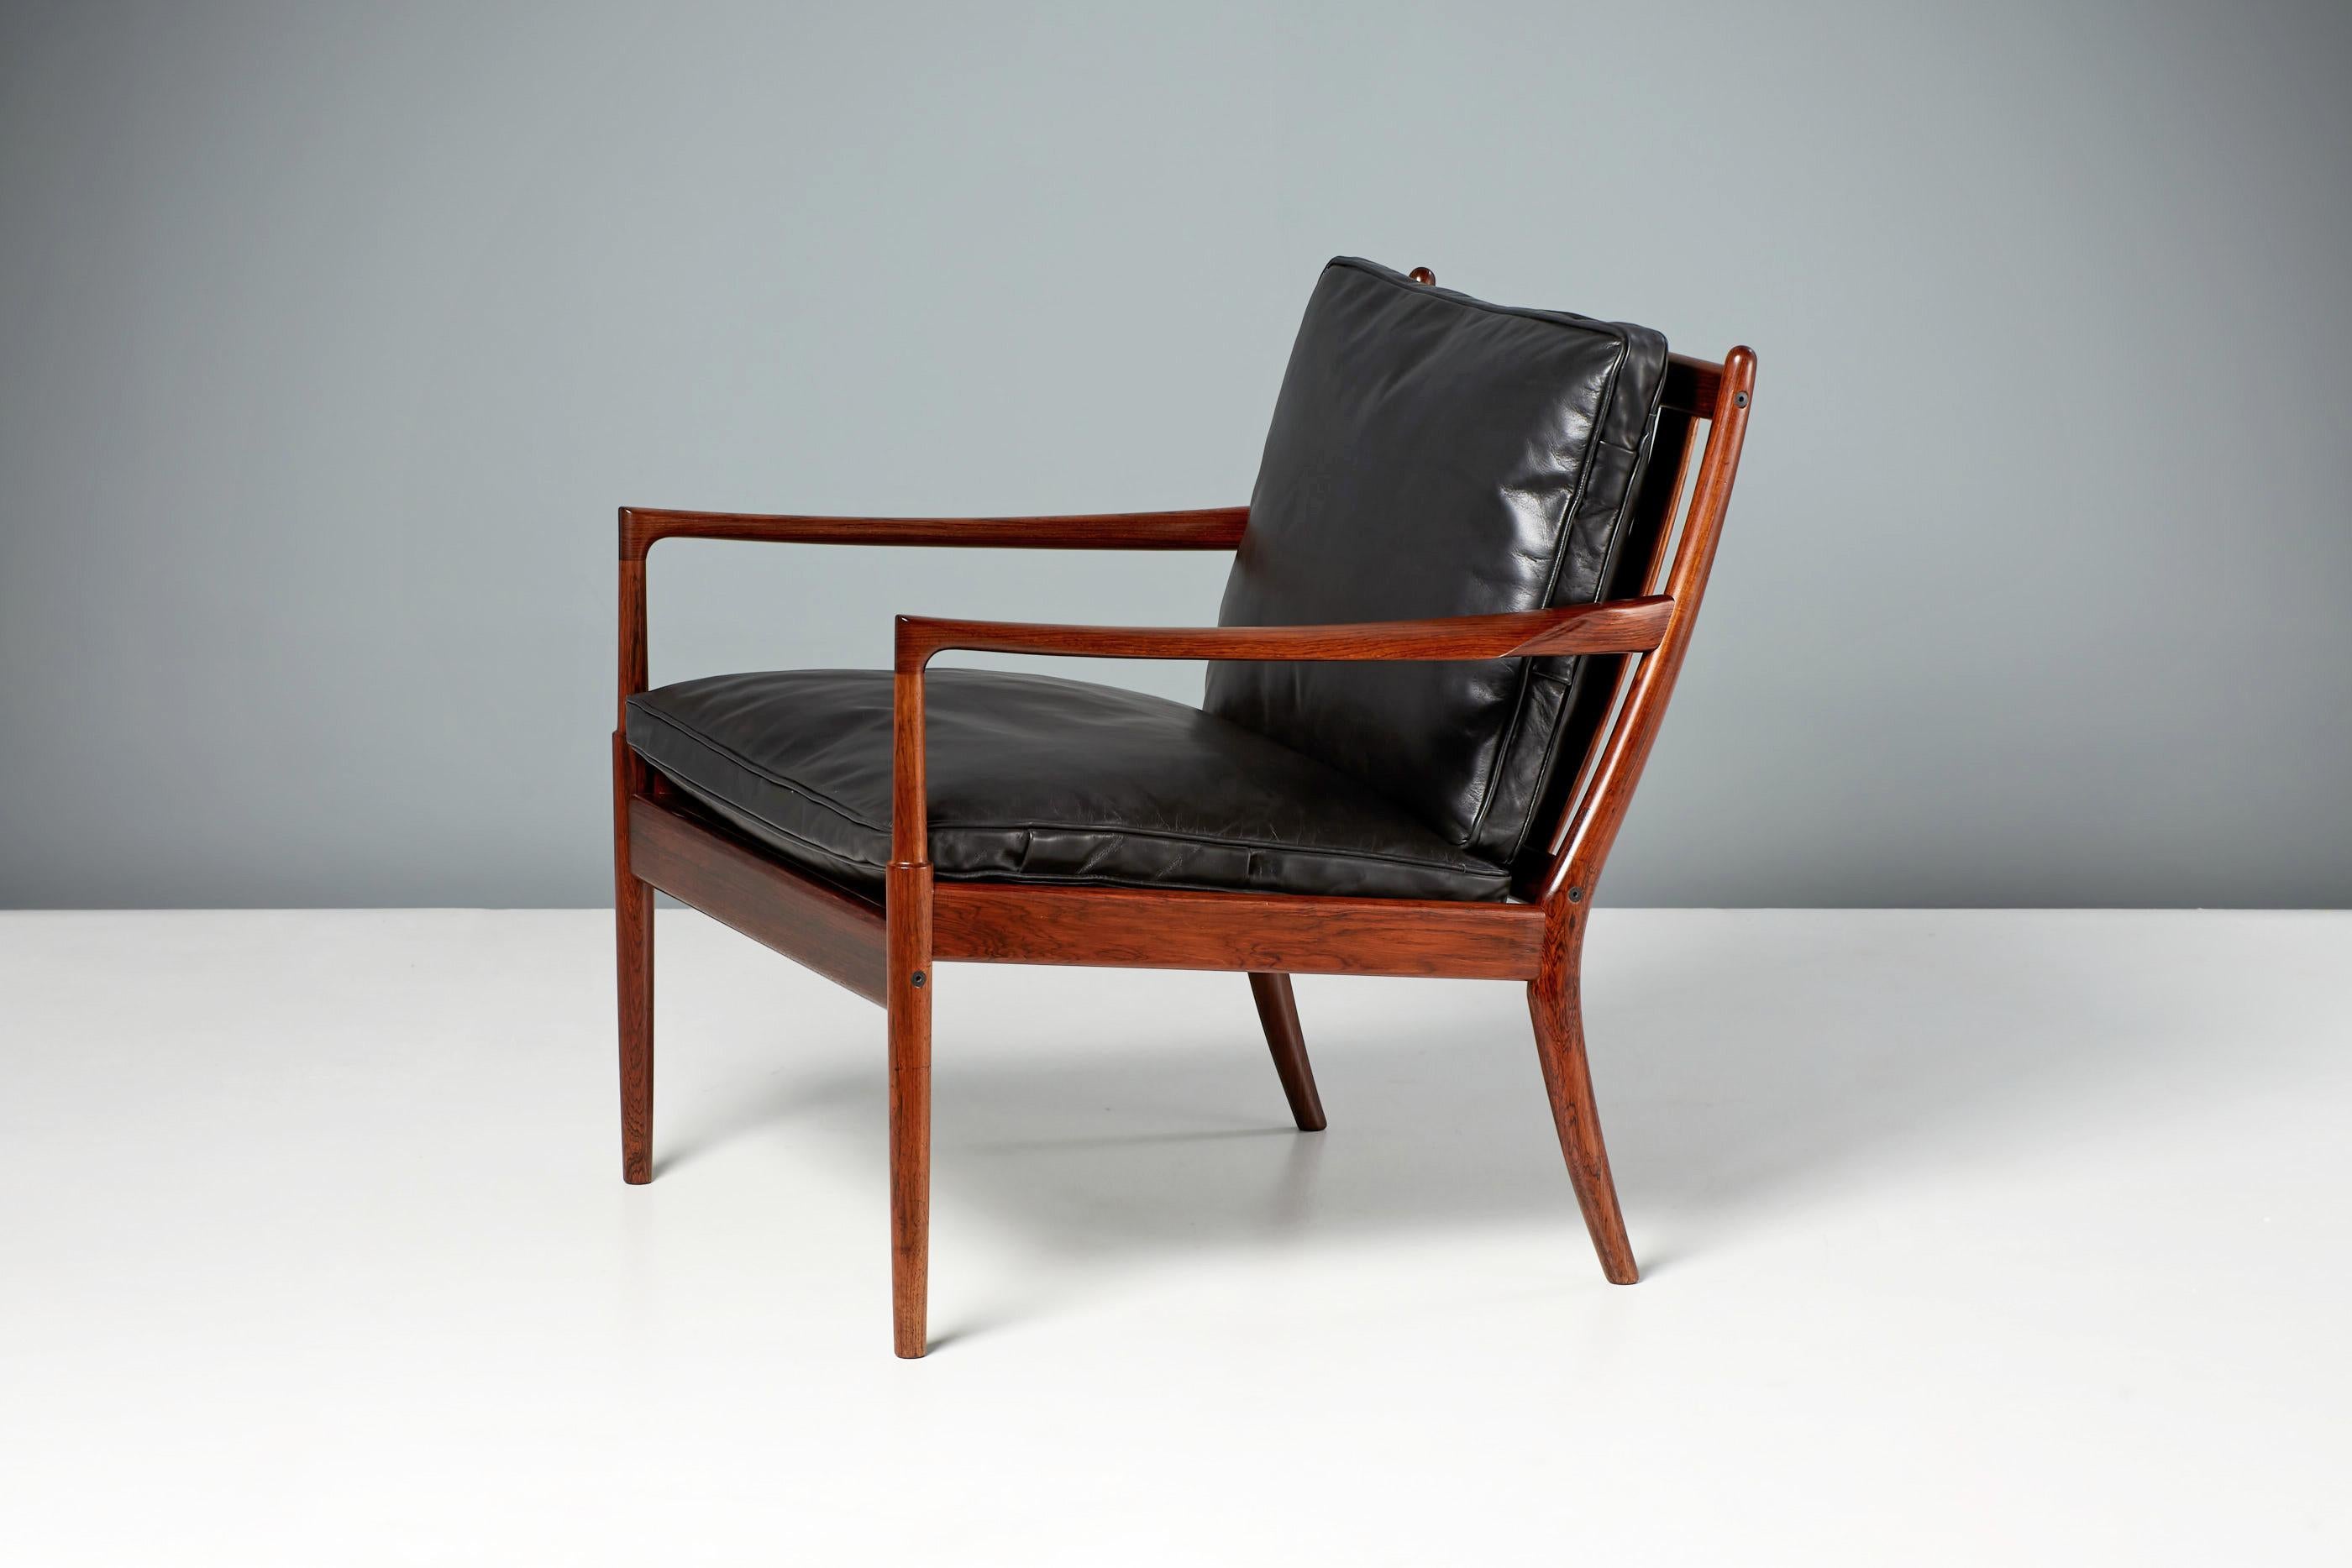 Ib Kofod-Larsen Samso Lounge Chairs, circa 1960s

Rare lounge chair produced for Olof Perssons Fatoljindustri (OPE) in Jonkoping, Sweden by Danish master designer Ib Kofod-Larsen. Sorensen Icon, Black Leather cushion covers and highly figured